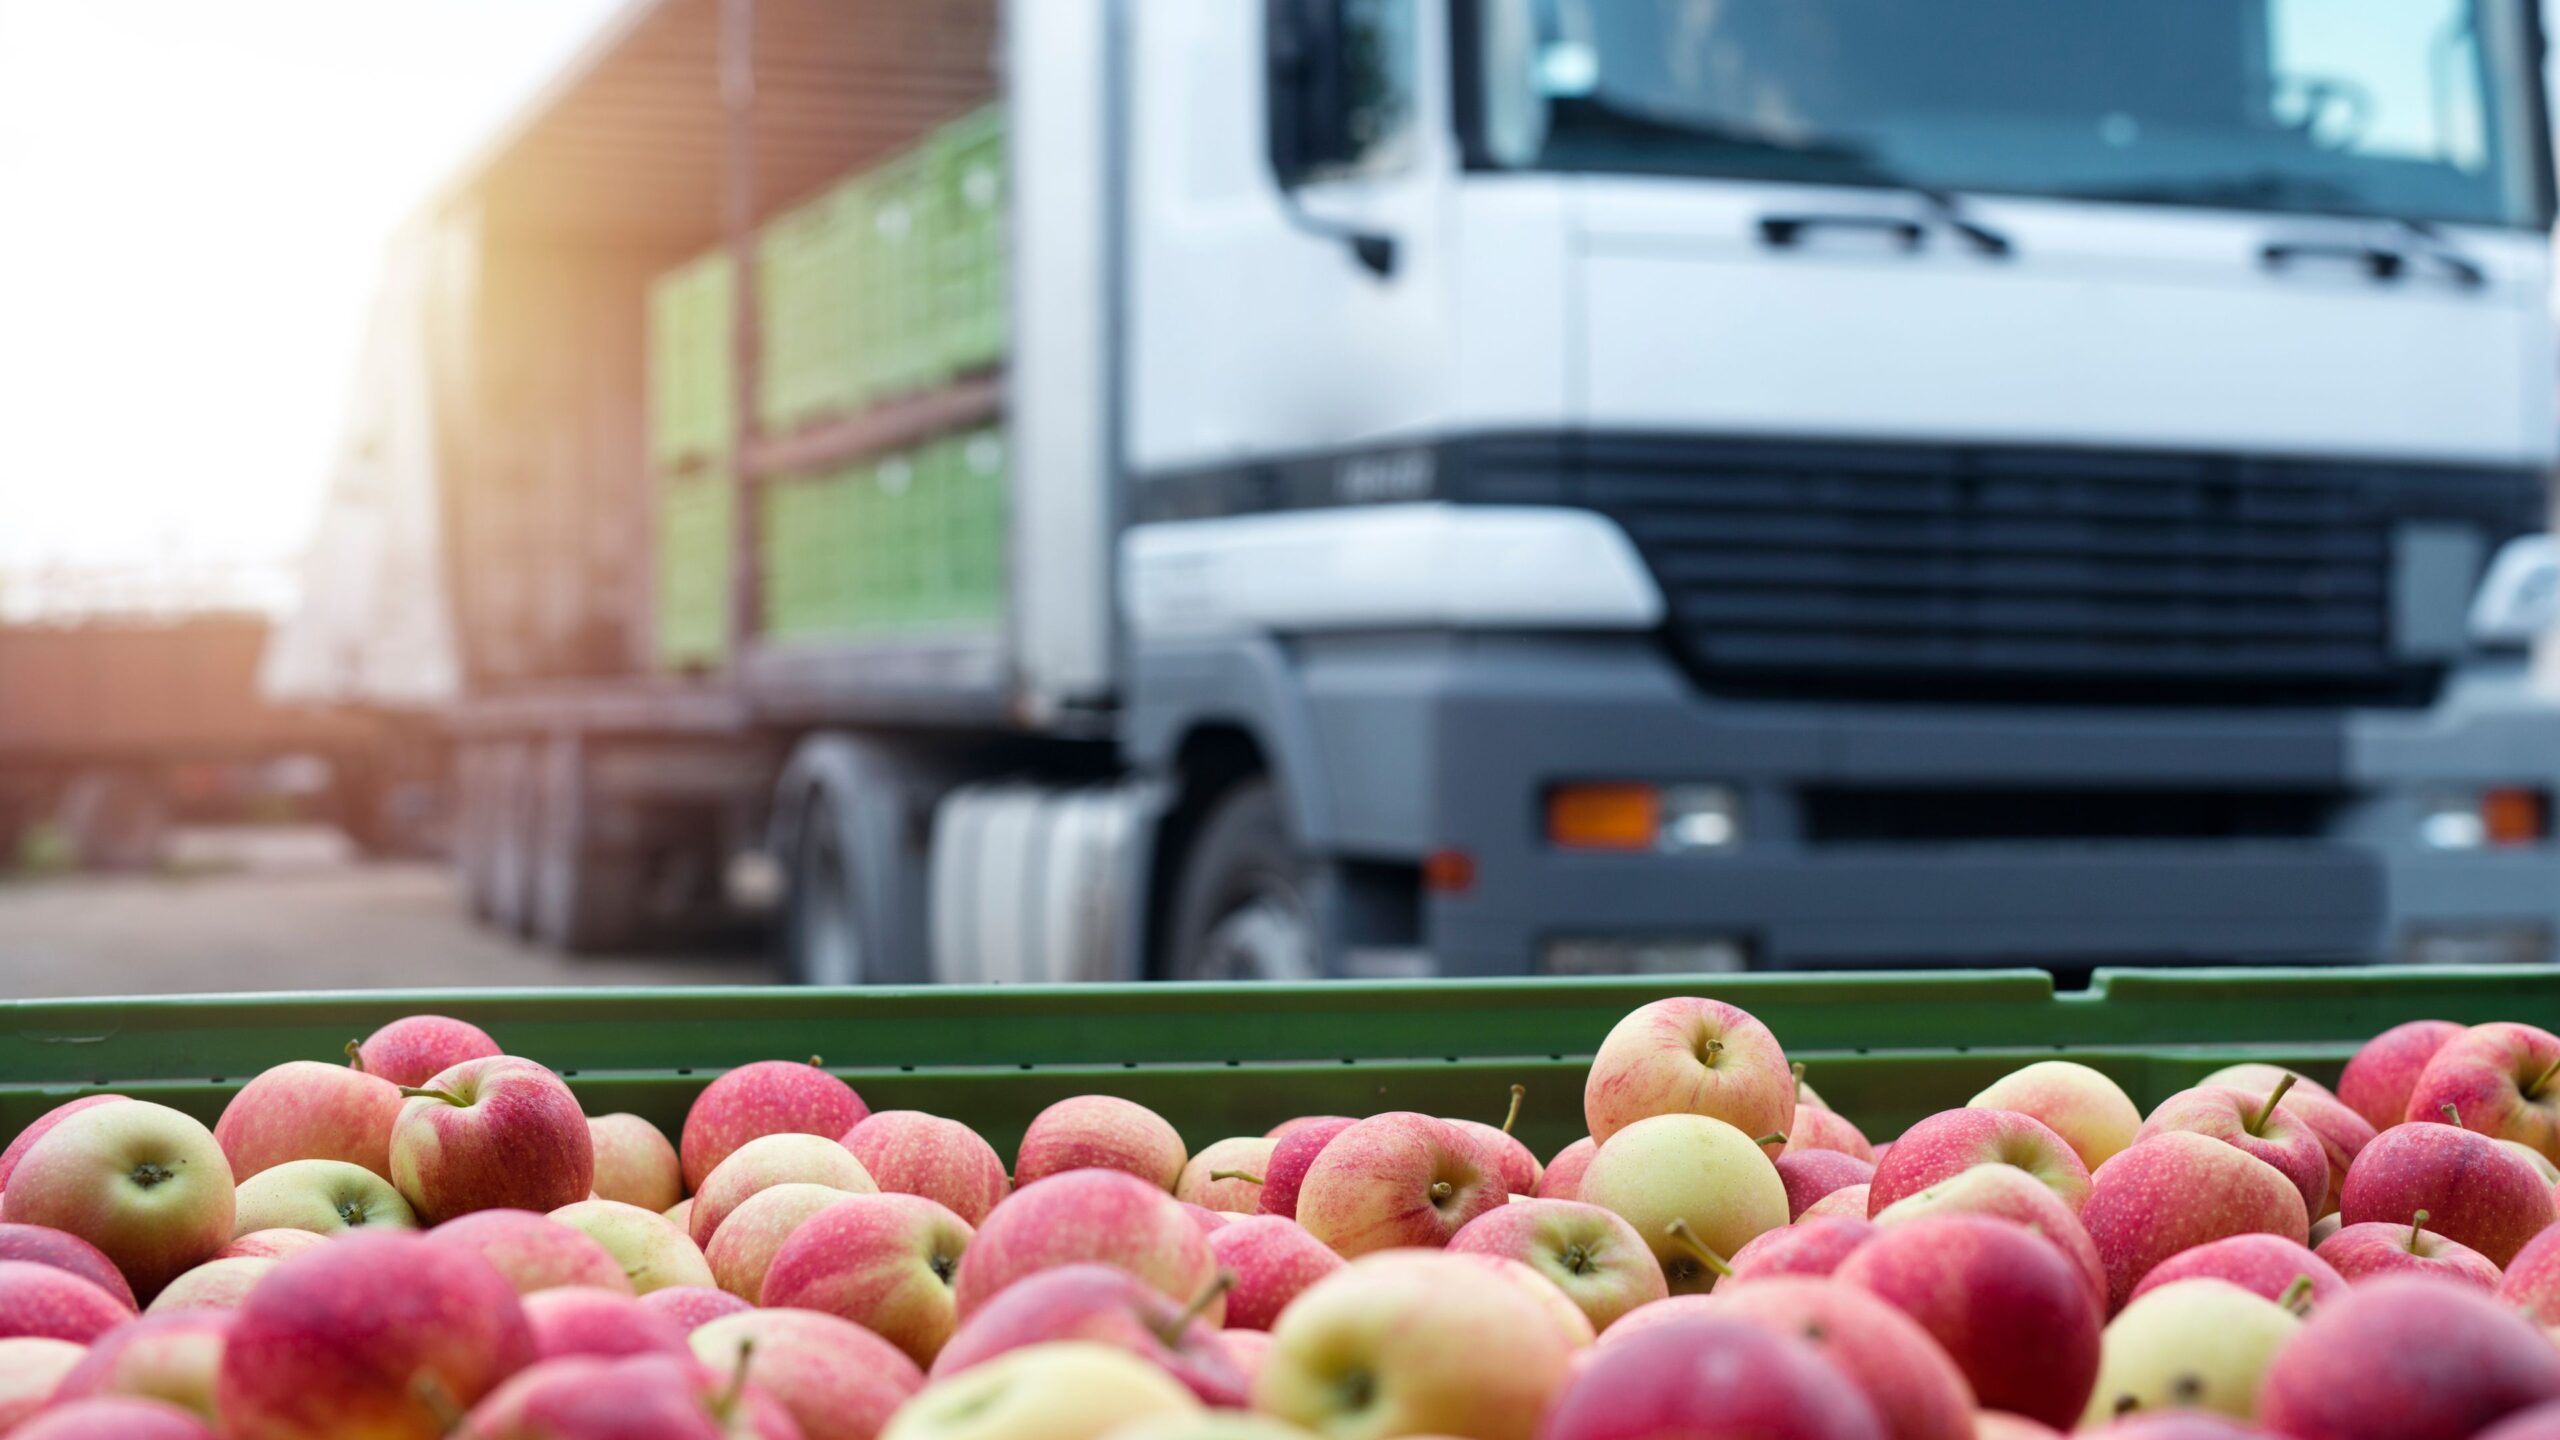 Food Distribution Software Helps Organize Food Inventory